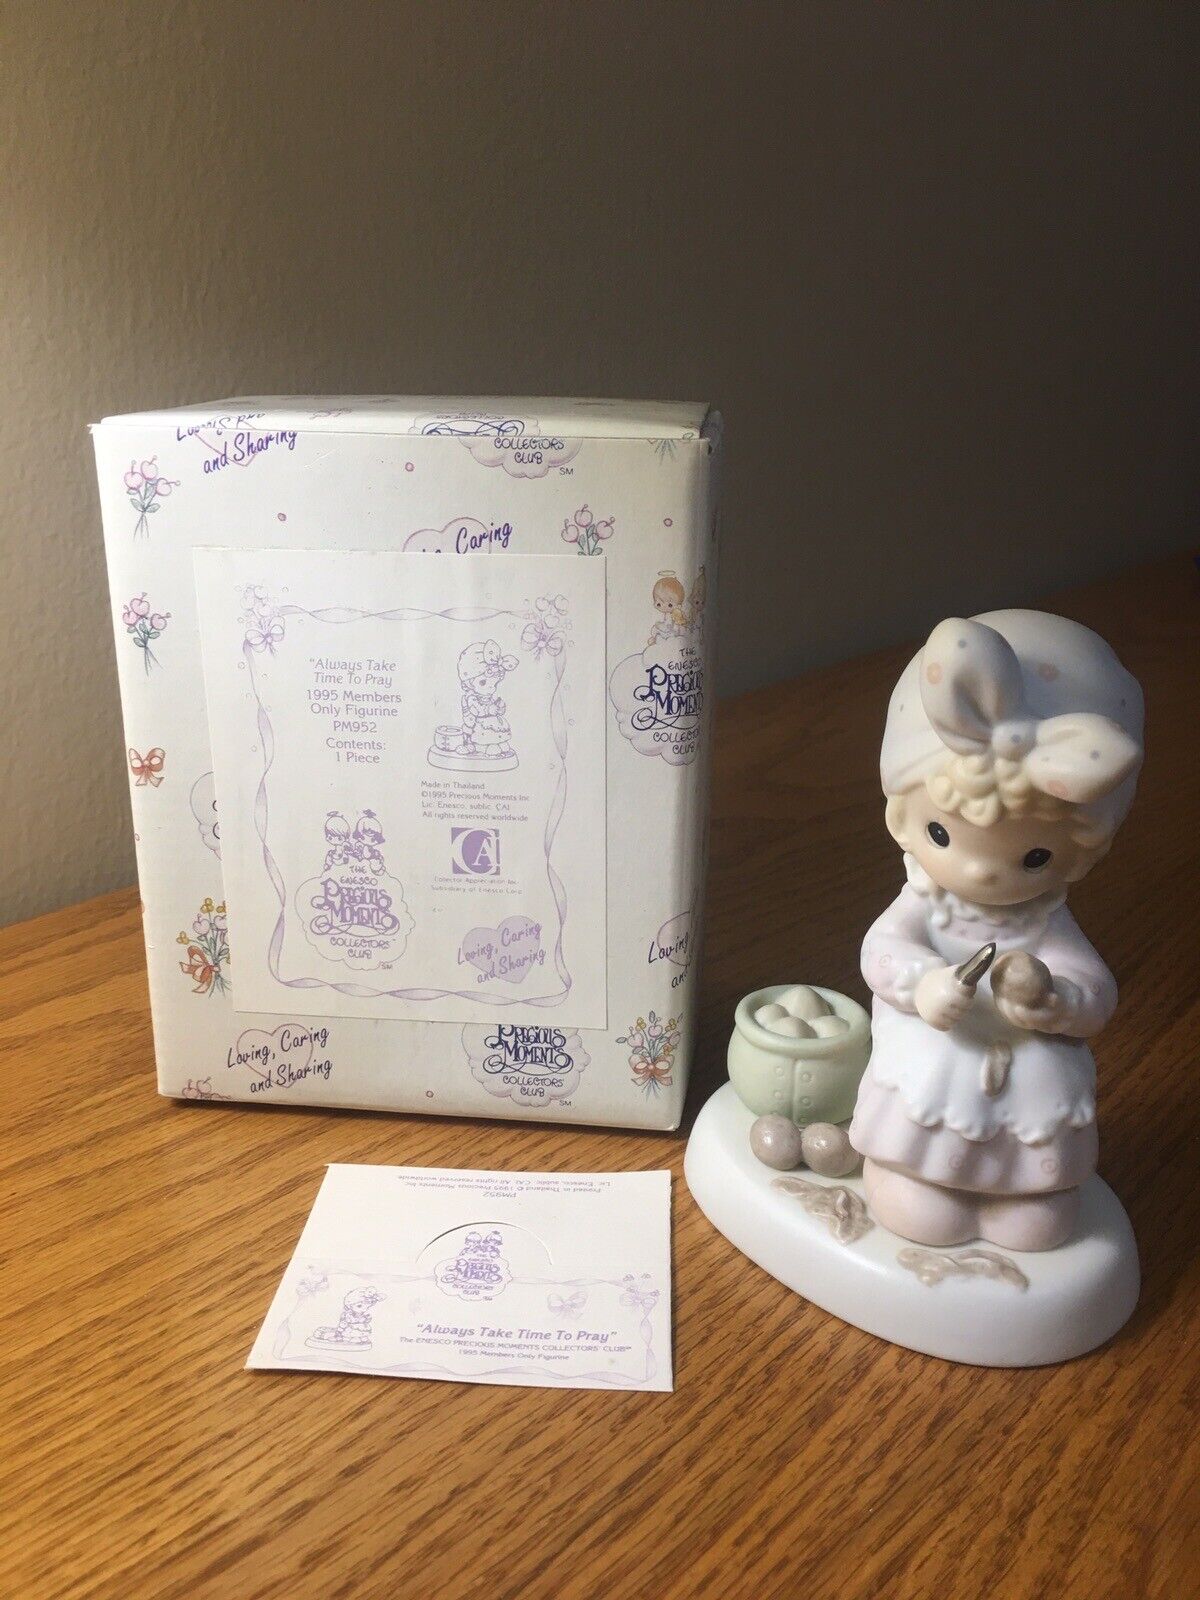 PRECIOUS MOMENTS ALWAYS TAKE TIME TO PRAY 1995 SIGNED MEMBERS ONLY FIGURINE 